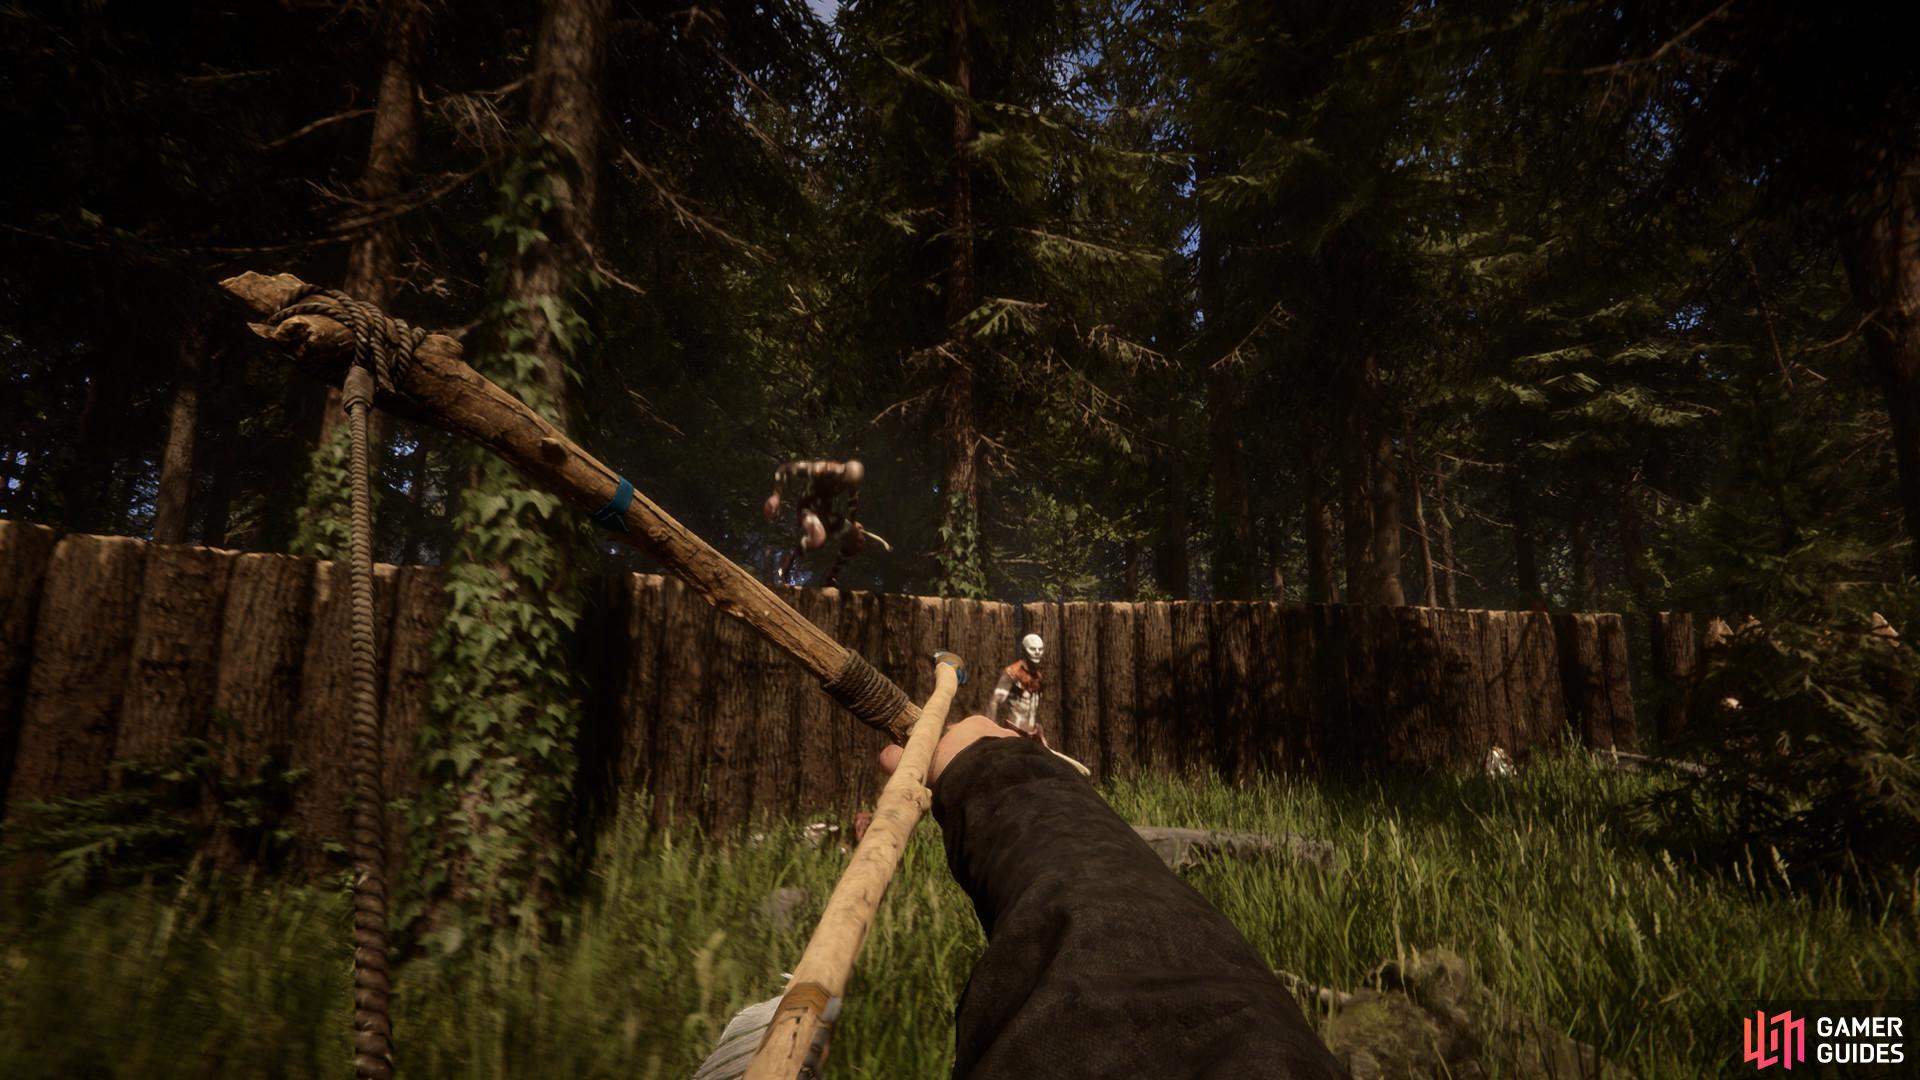 Can your PC run it, or will you stutter trying to hit these targets because you can’t handle the Sons of the Forest system requirements? Image via Endnight.